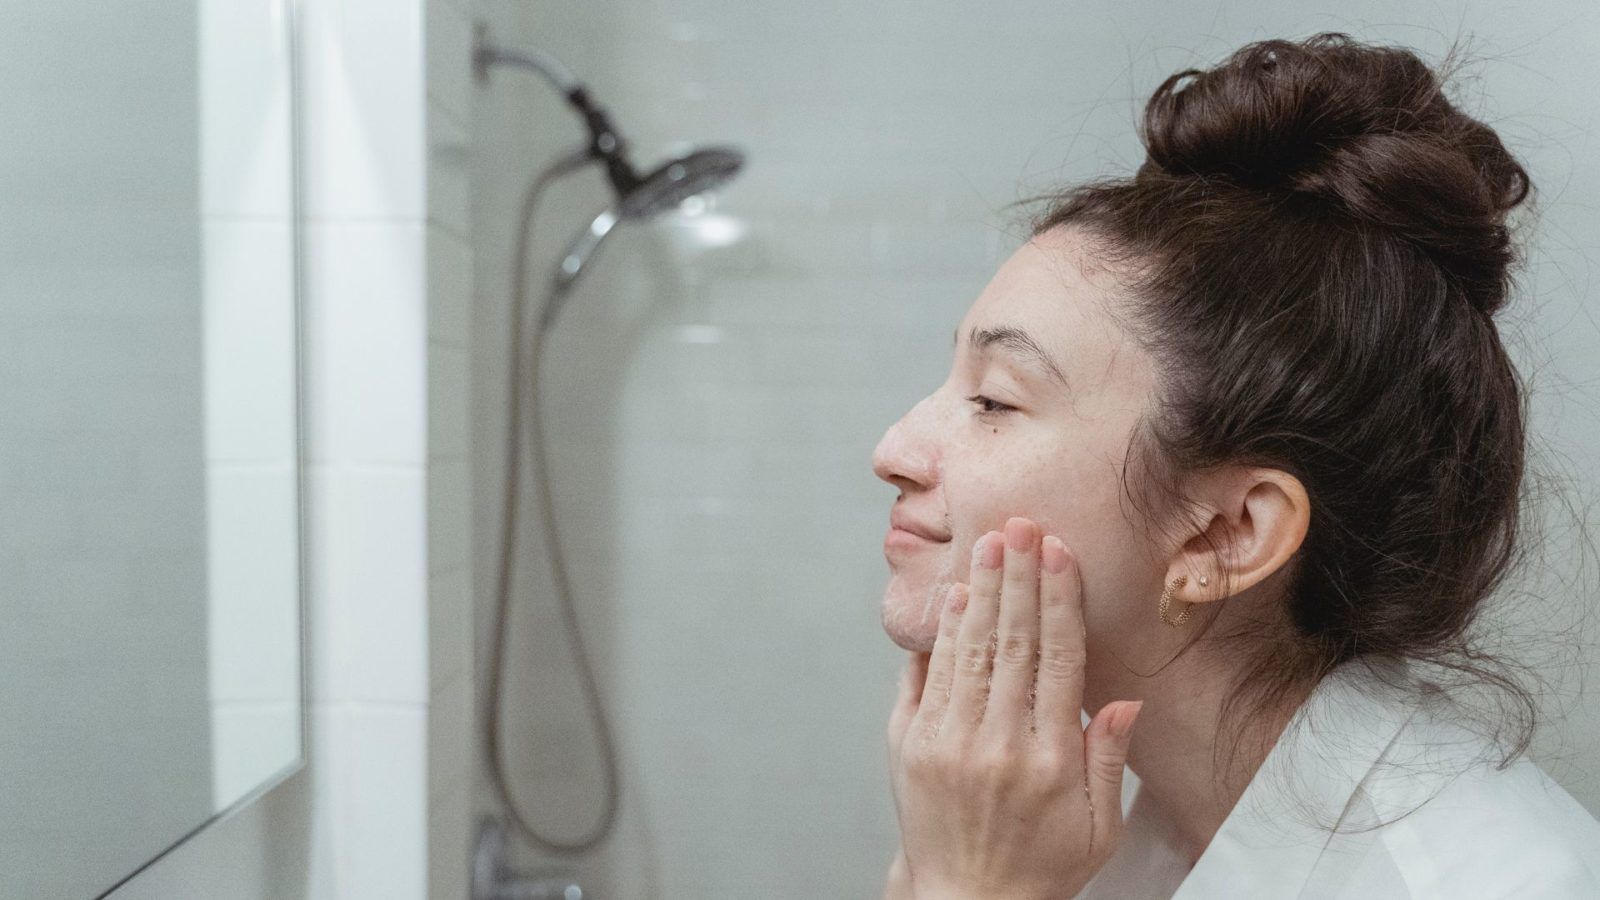 Check out these salicylic acid face washes for an acne-prone skin